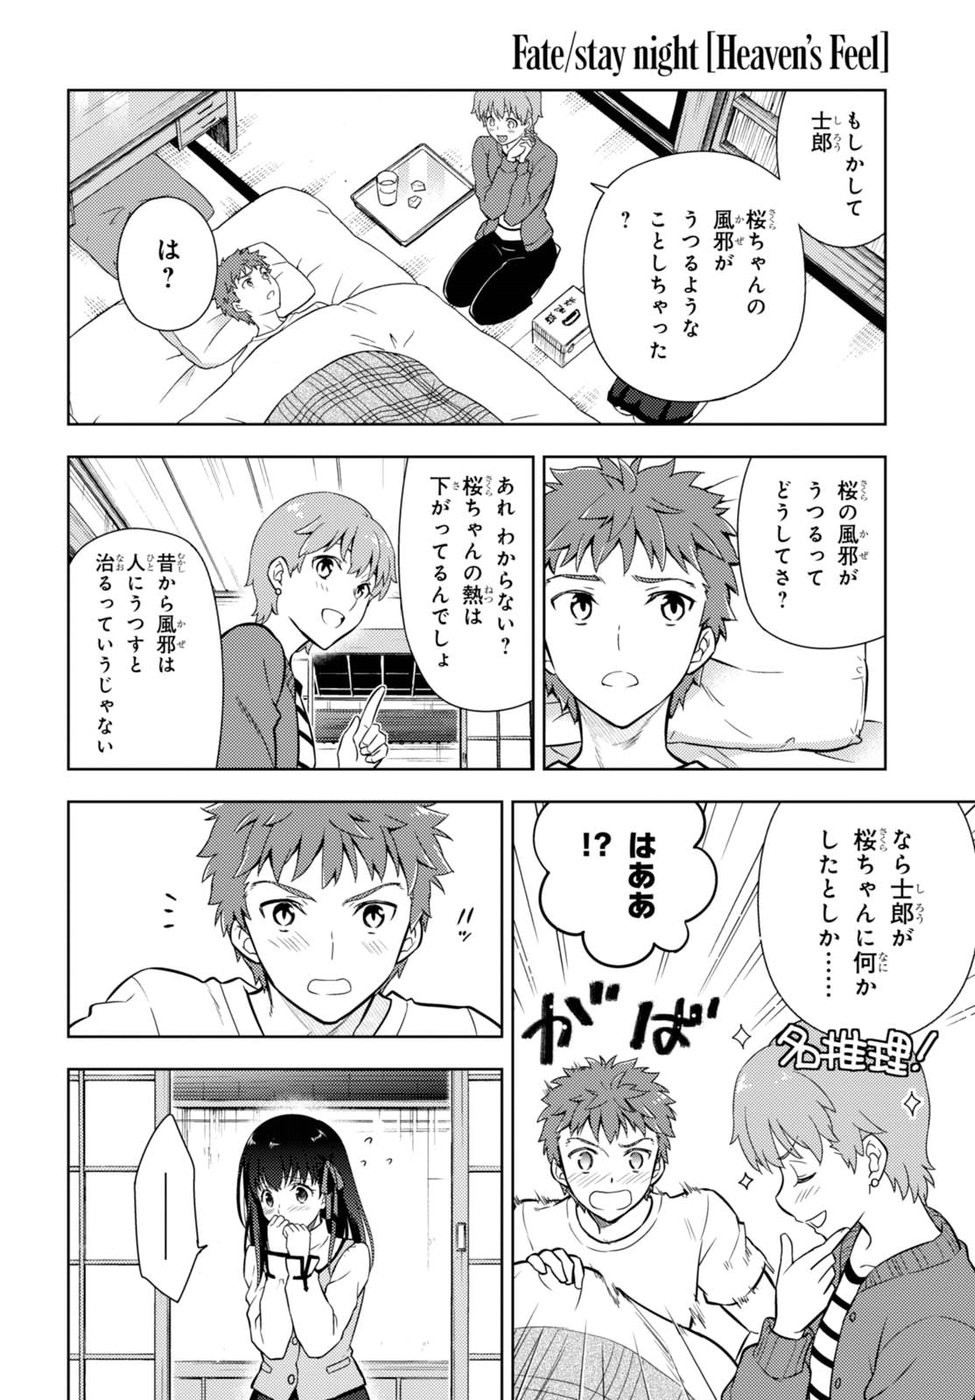 Fate/Stay night Heaven's Feel - Chapter 32 - Page 4